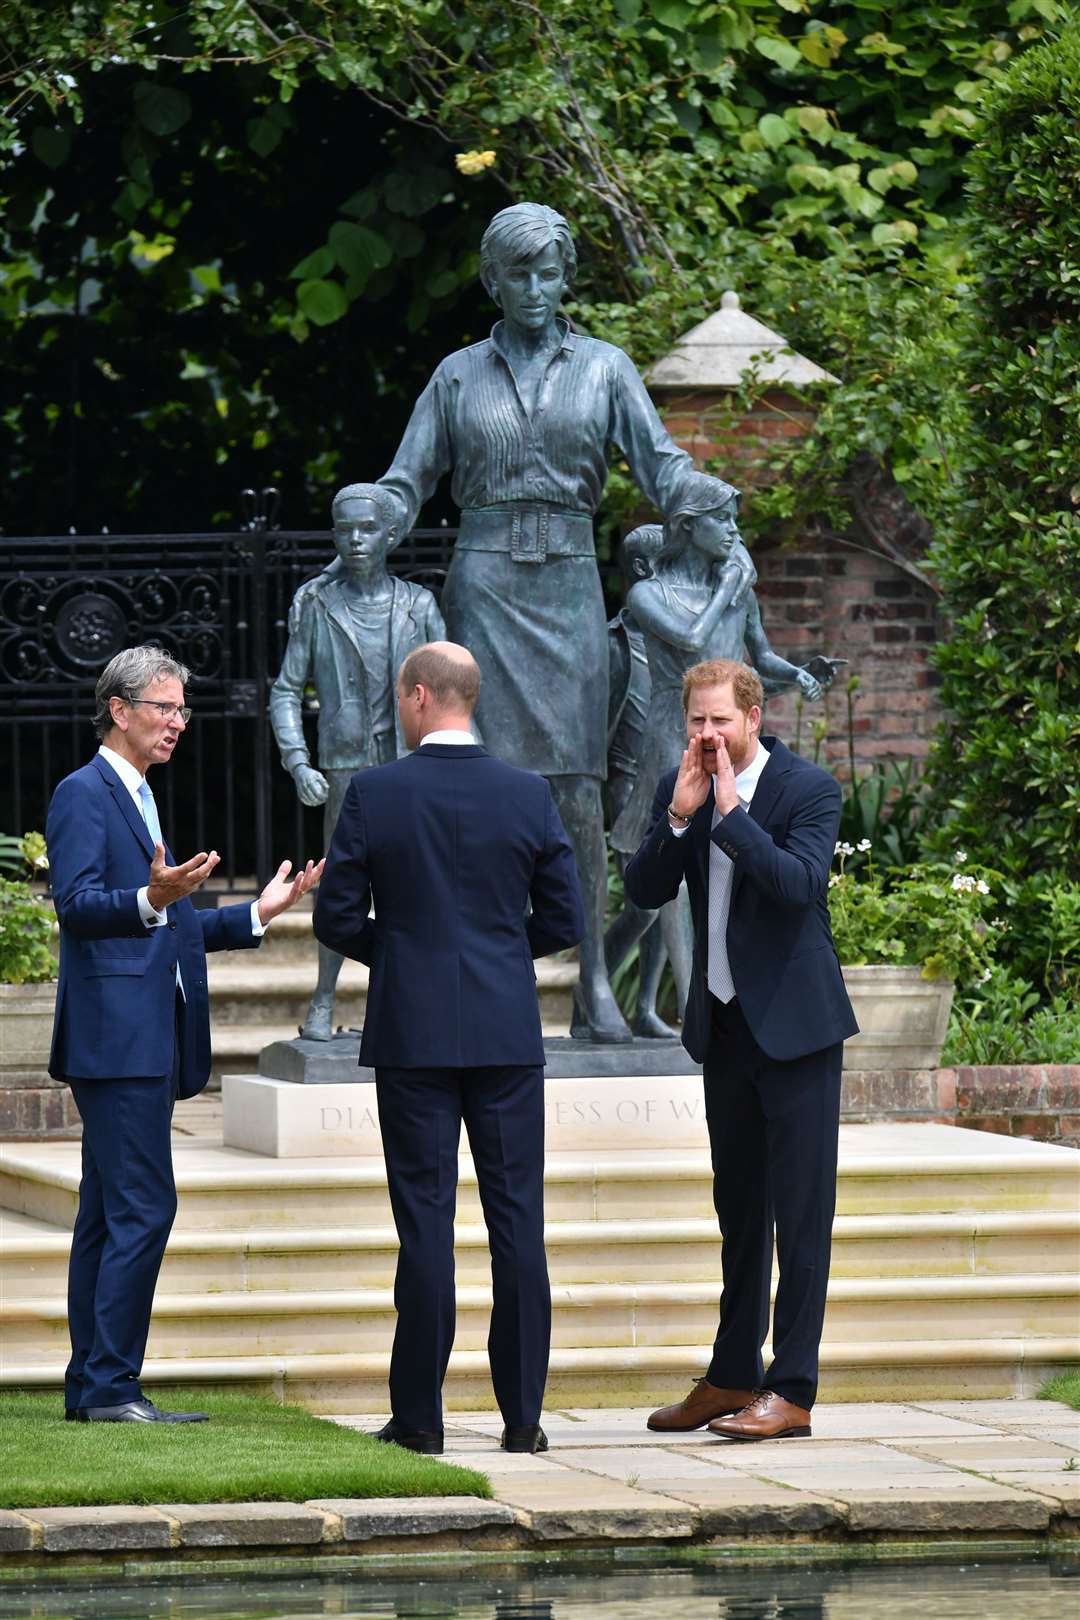 Sculptor Ian Rank-Broadley, the Duke of Cambridge and the Duke of Sussex after the unveiling of the statue (Dominic Lipinski/PA)